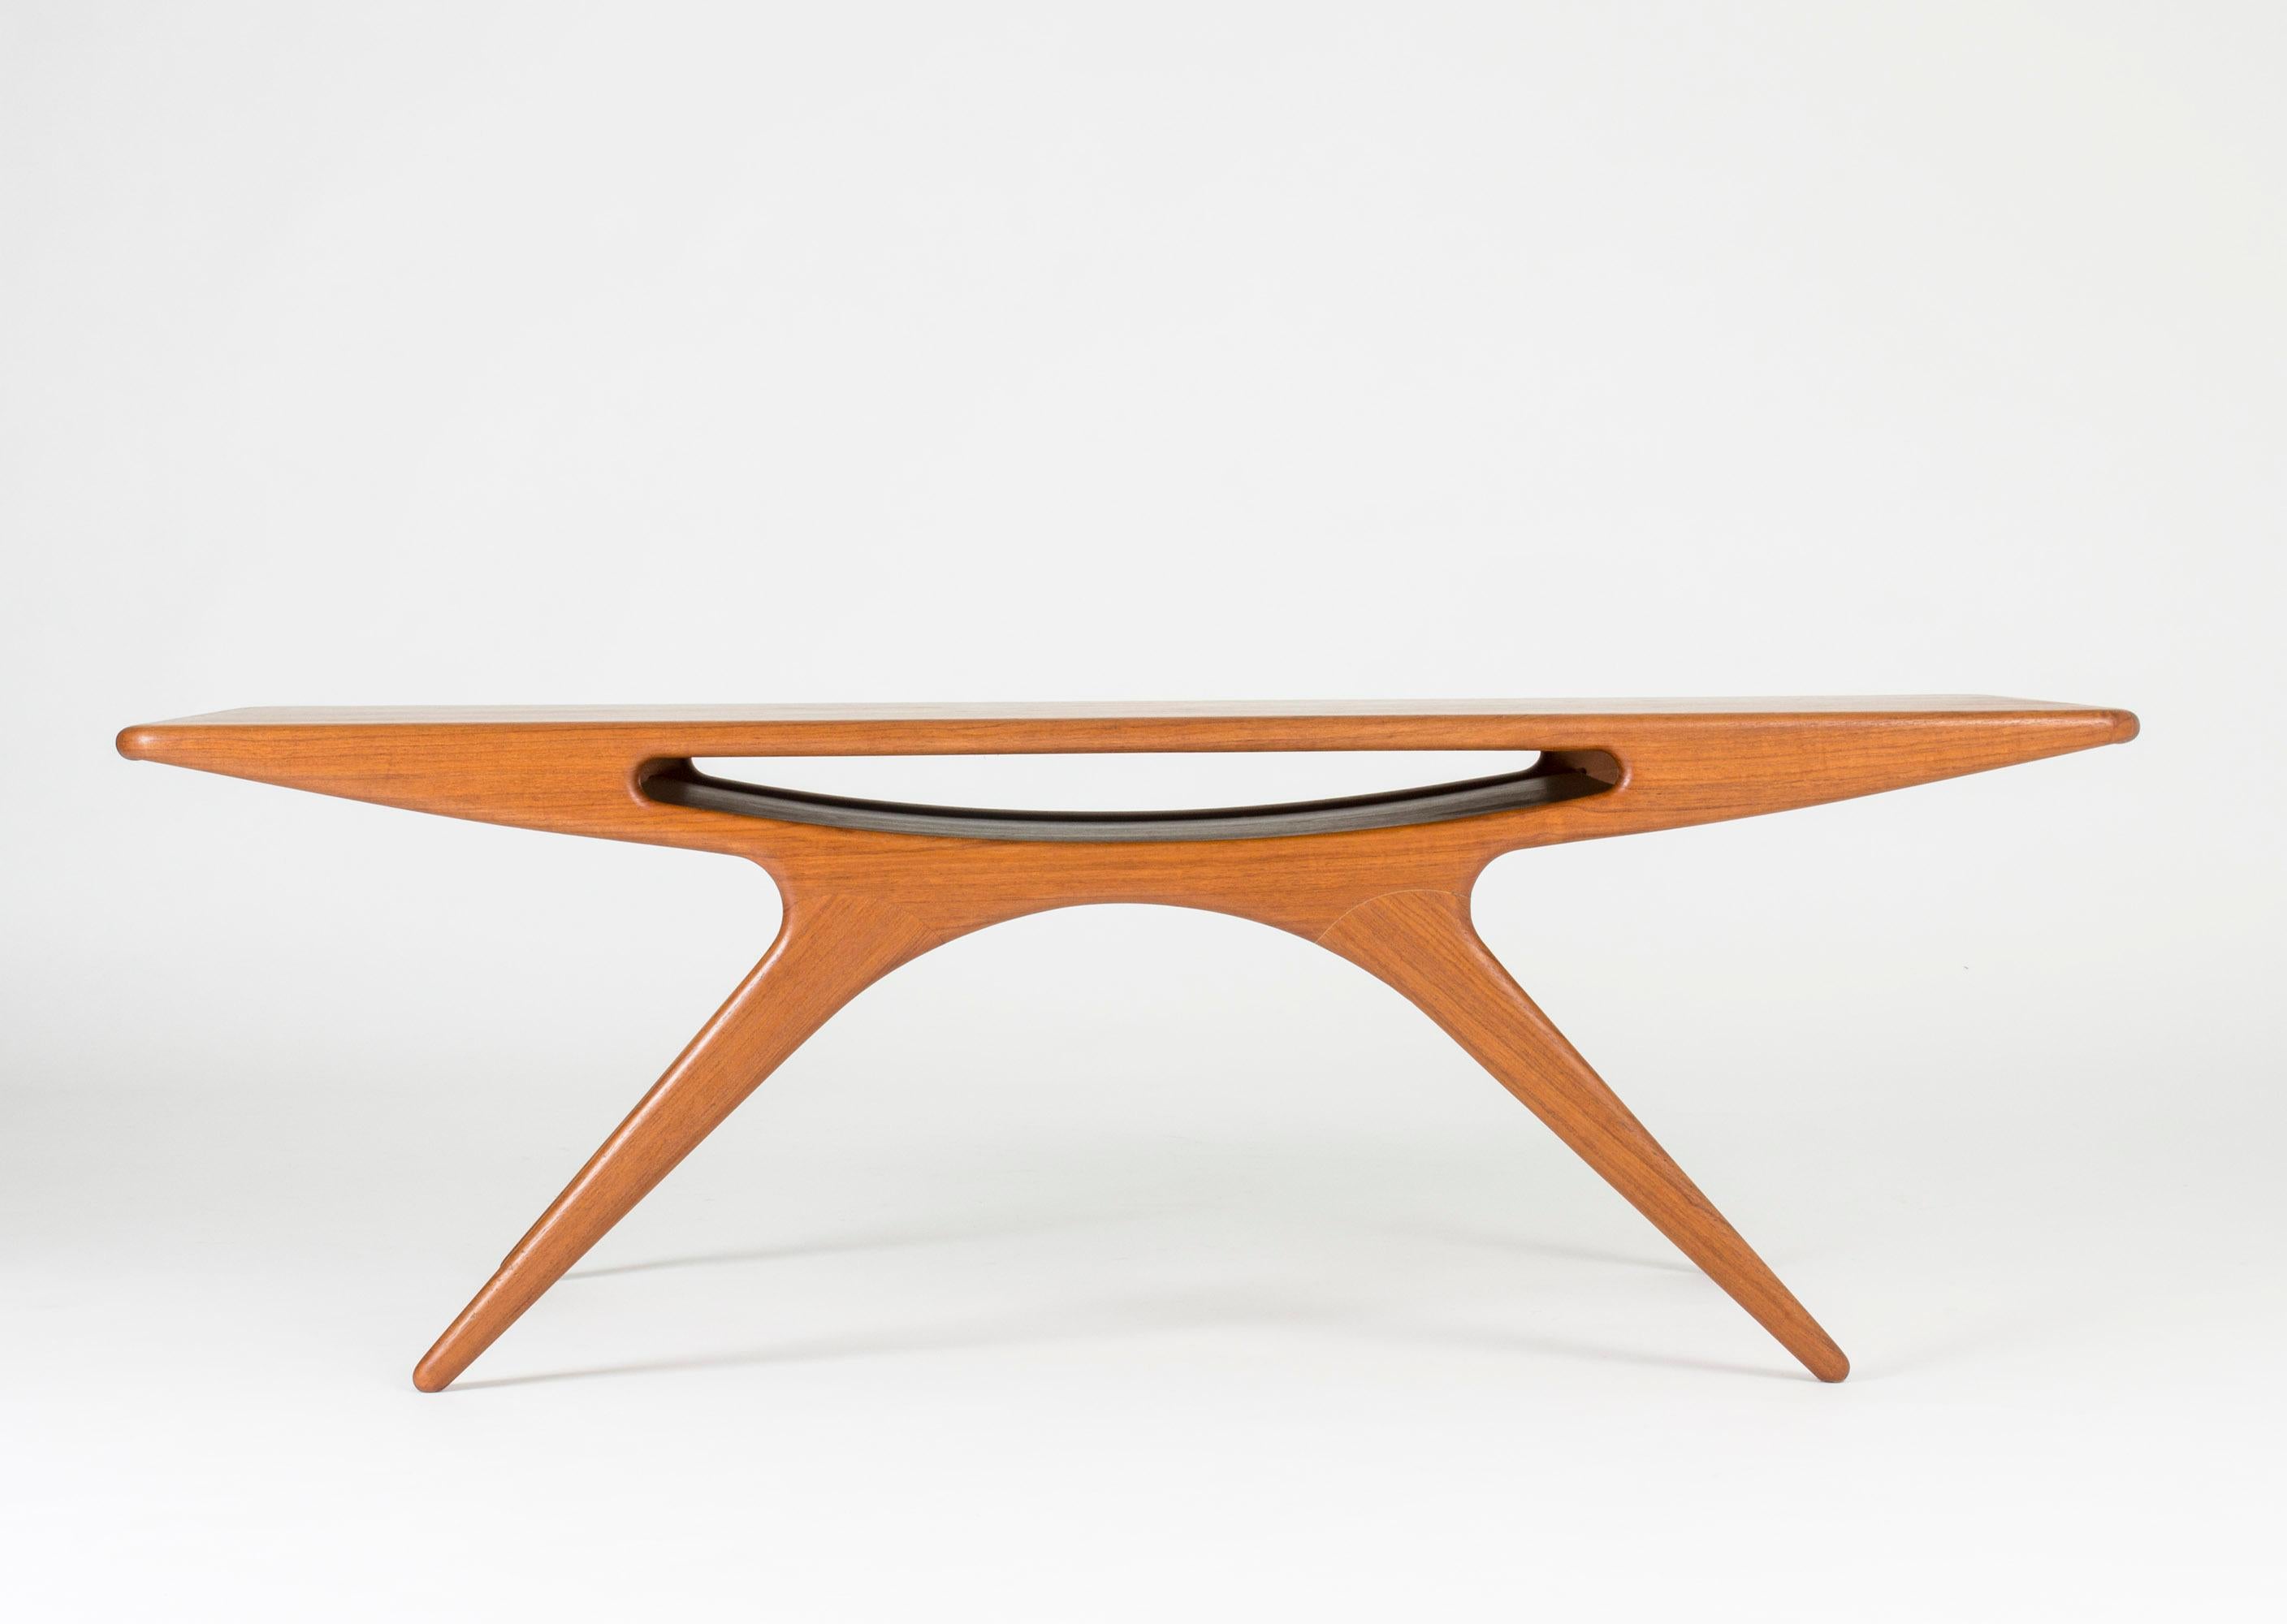 Teak “Smile” coffee table by Johannes Andersen, in a beautiful design with smooth lines and seamless joinery.